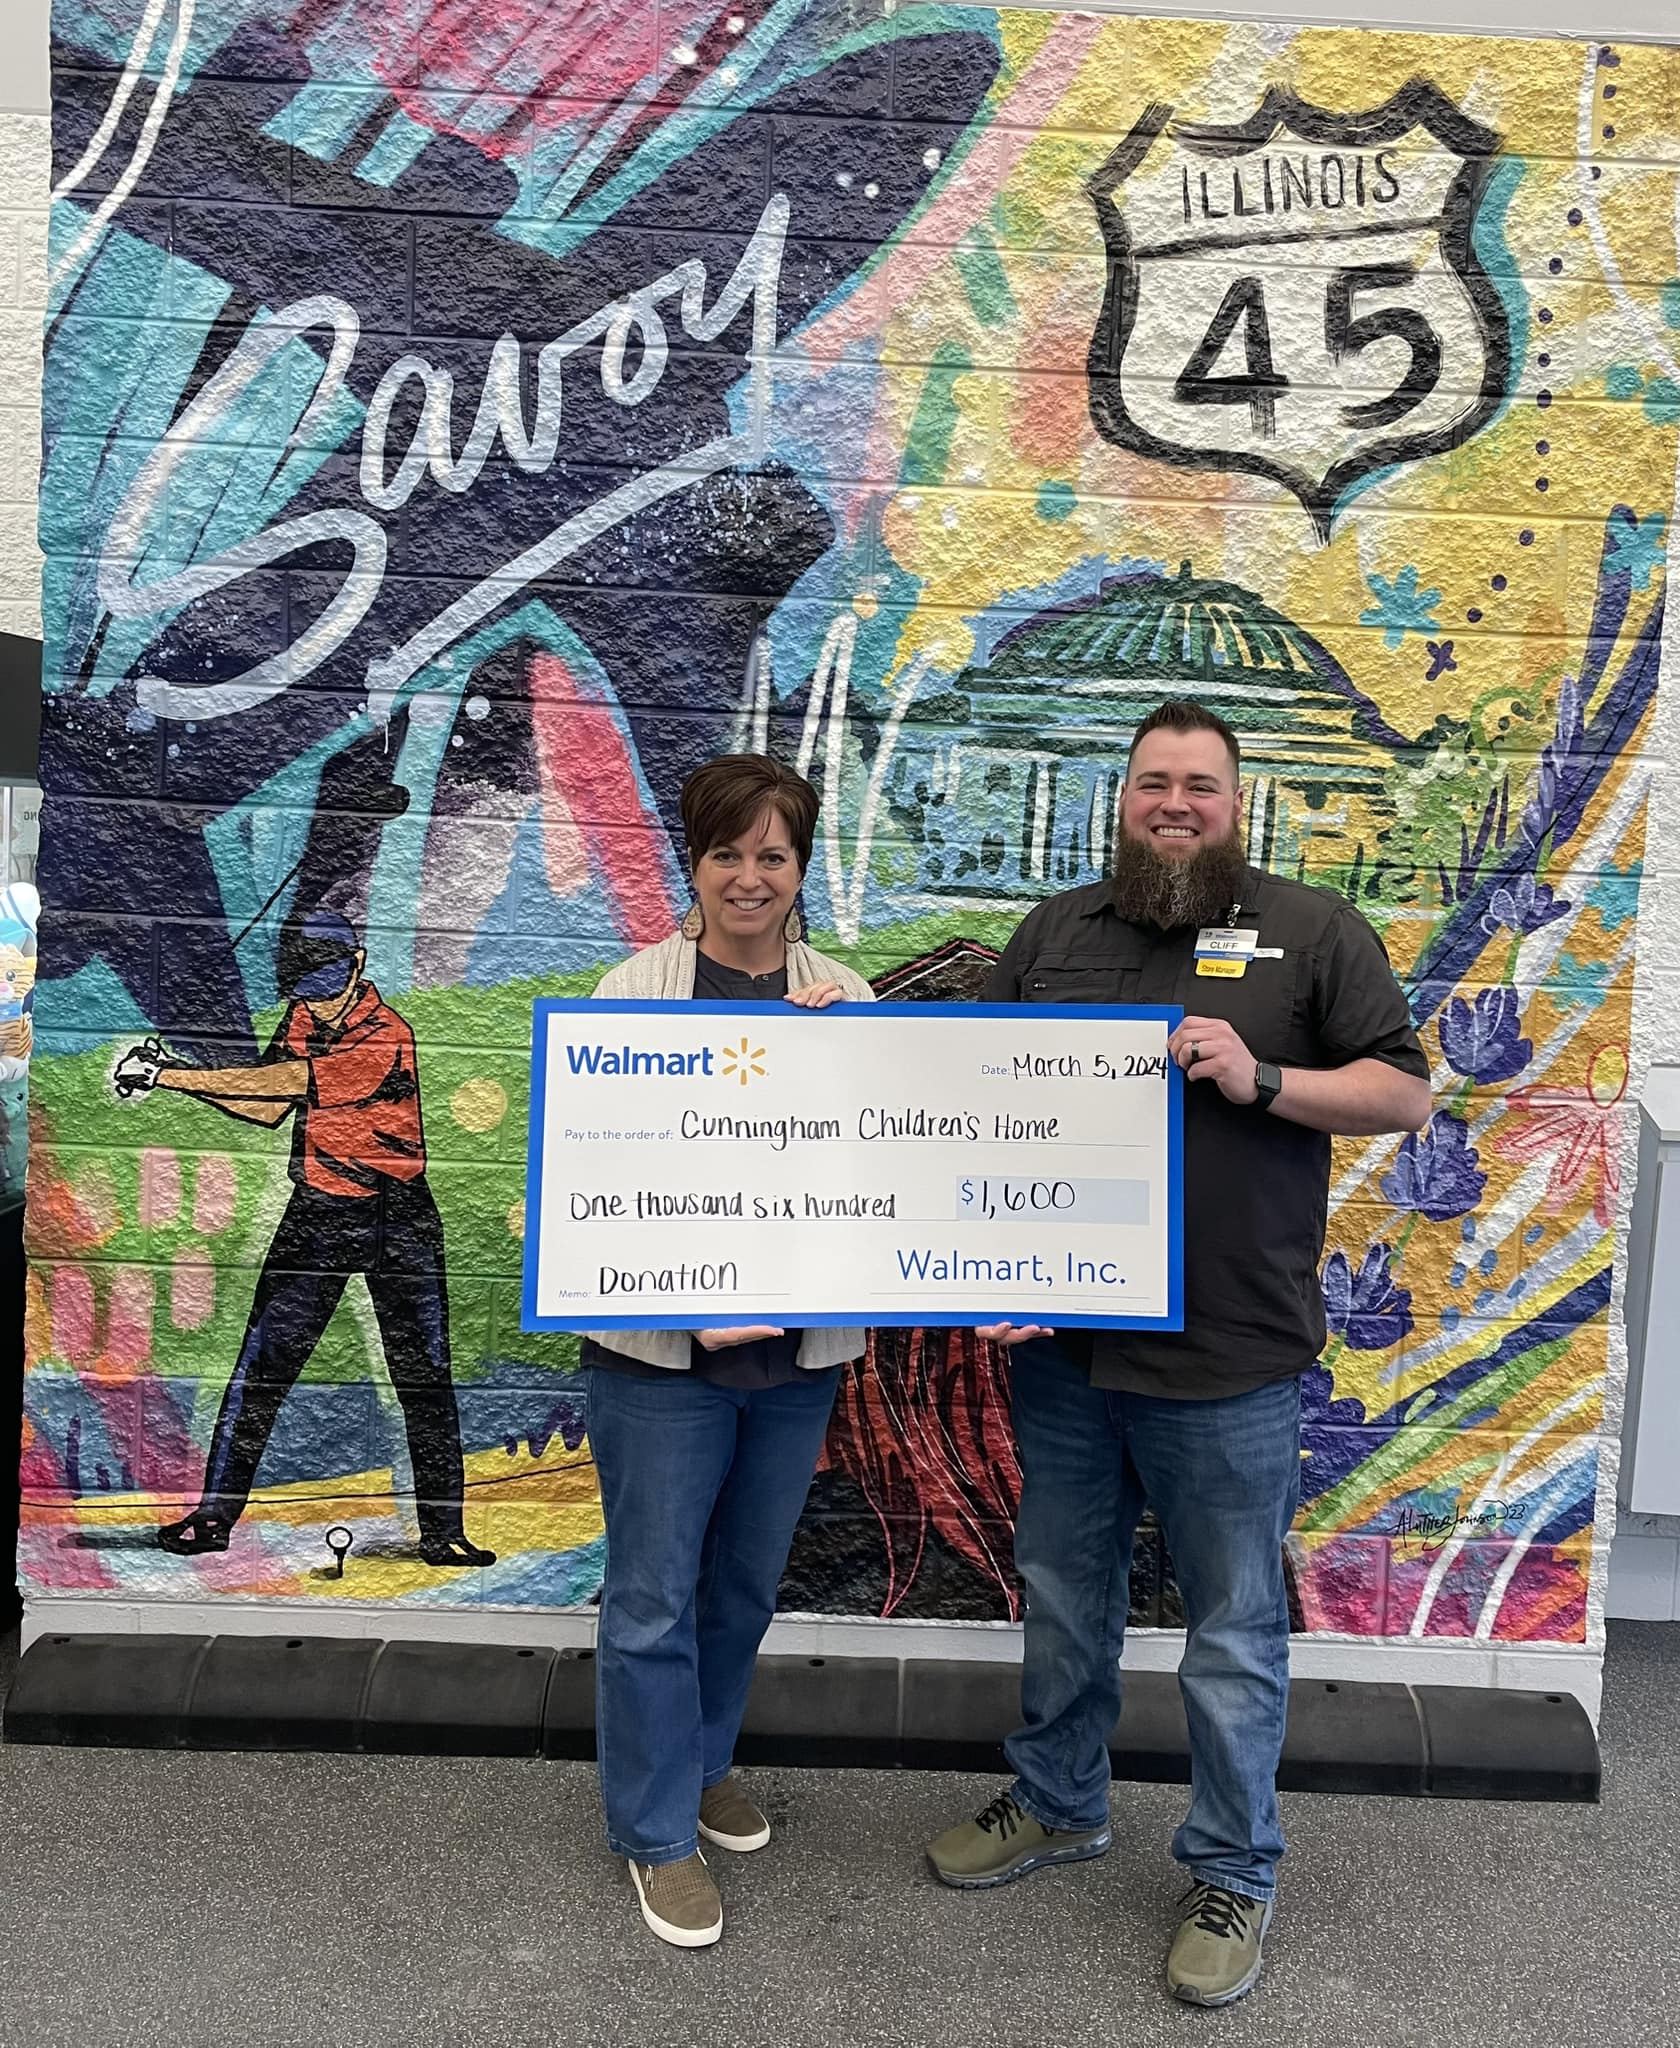 Adult male and female standing in front of a painted wall with illustrations that represent Savoy and holding a large check from Walmart valued at $1,600.